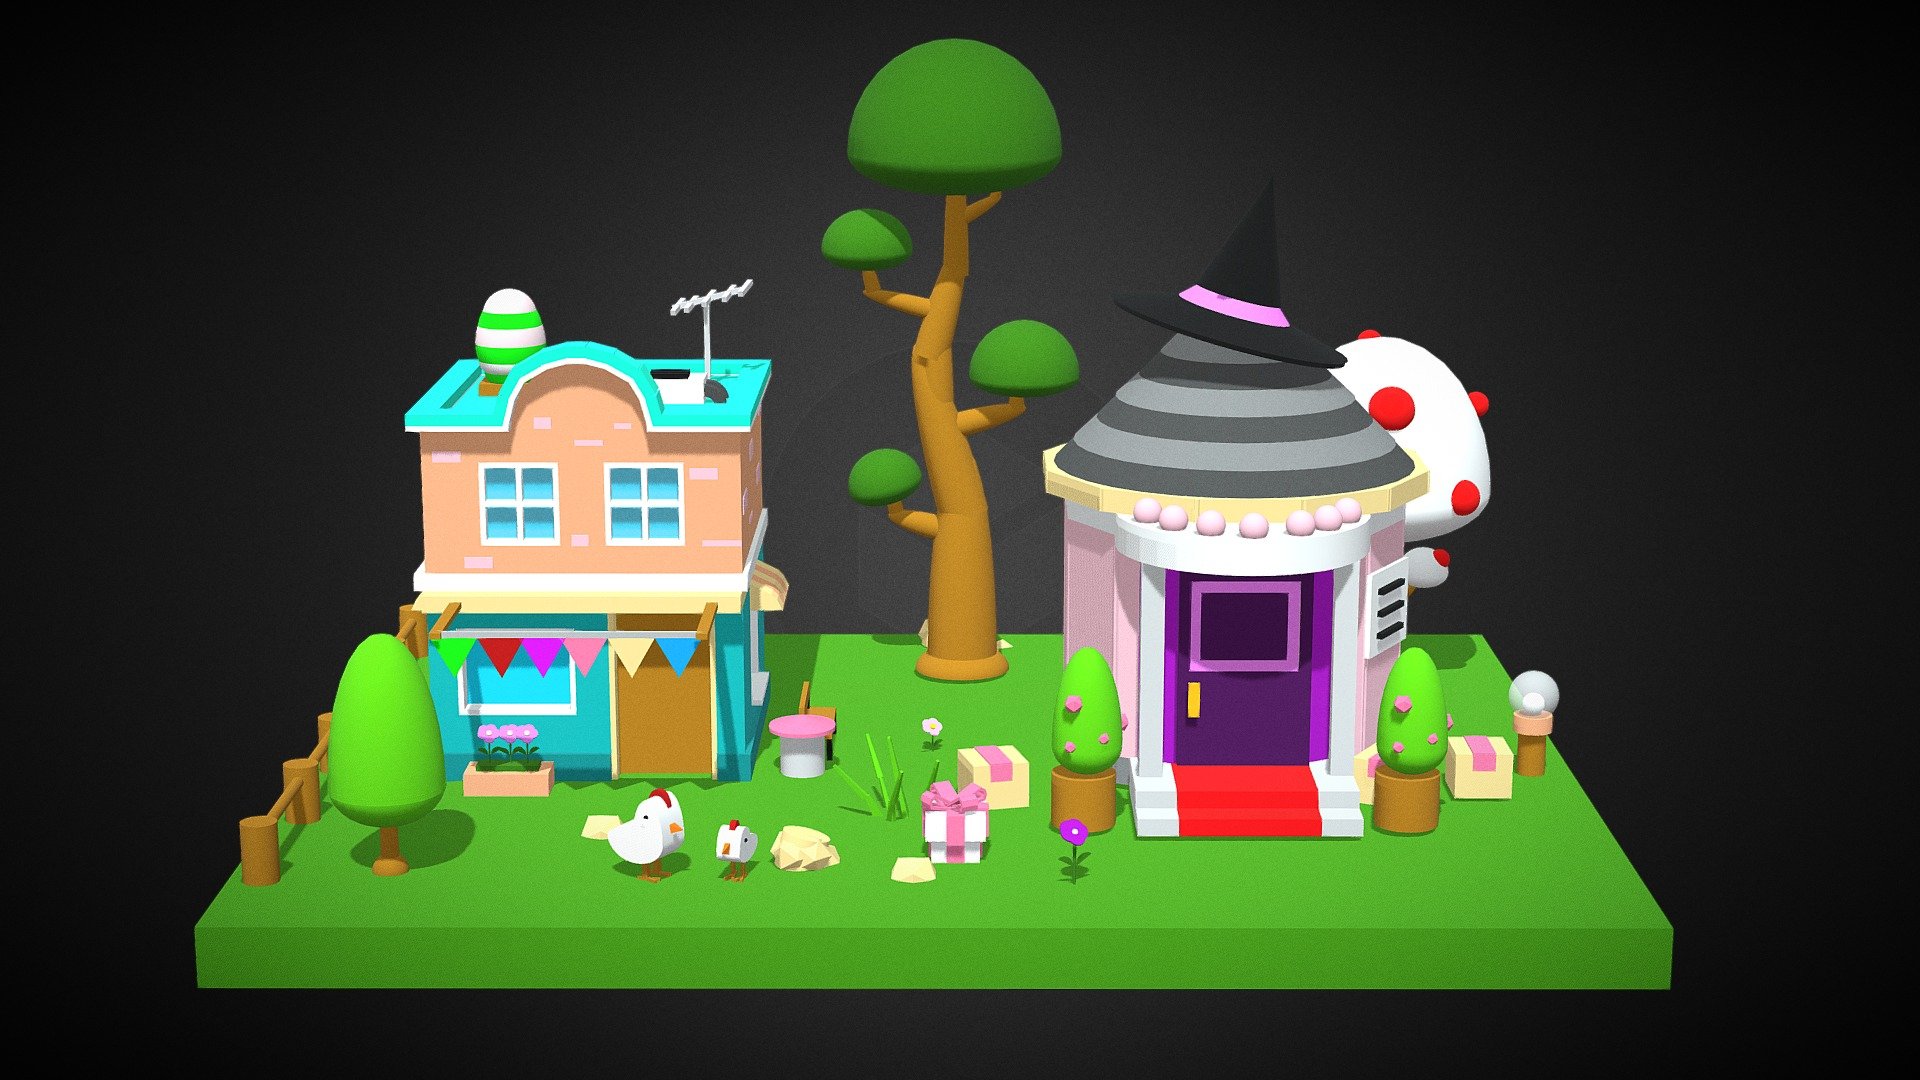 All the models are made by 🏠👉3d.xyz

Page link👉: 3d.xyz

All models are free on this page 🎉

Modeling is very easy and I would recommend anyone to try it ！ 😁😻🎁 - Cartoon Magic House1 - Download Free 3D model by 3d.xyz (@webuild) 3d model